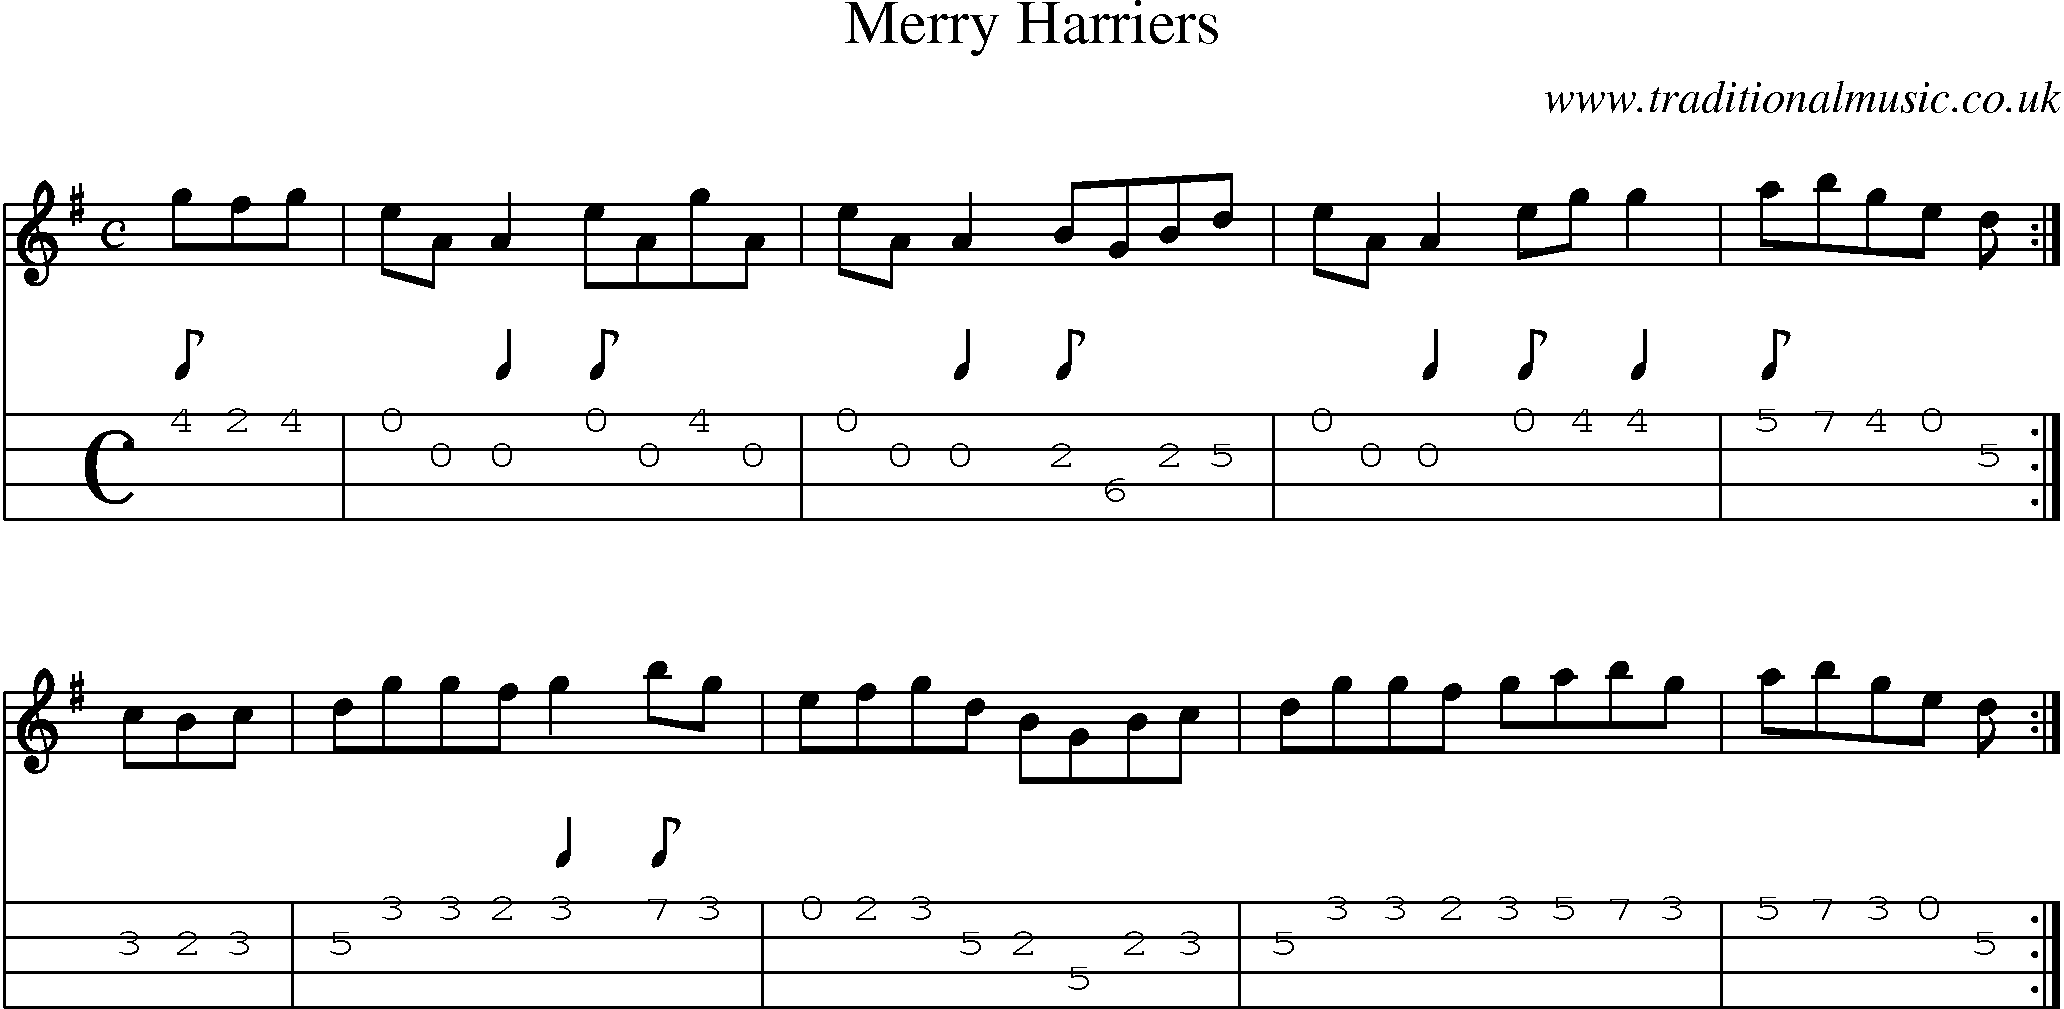 Music Score and Mandolin Tabs for Merry Harriers